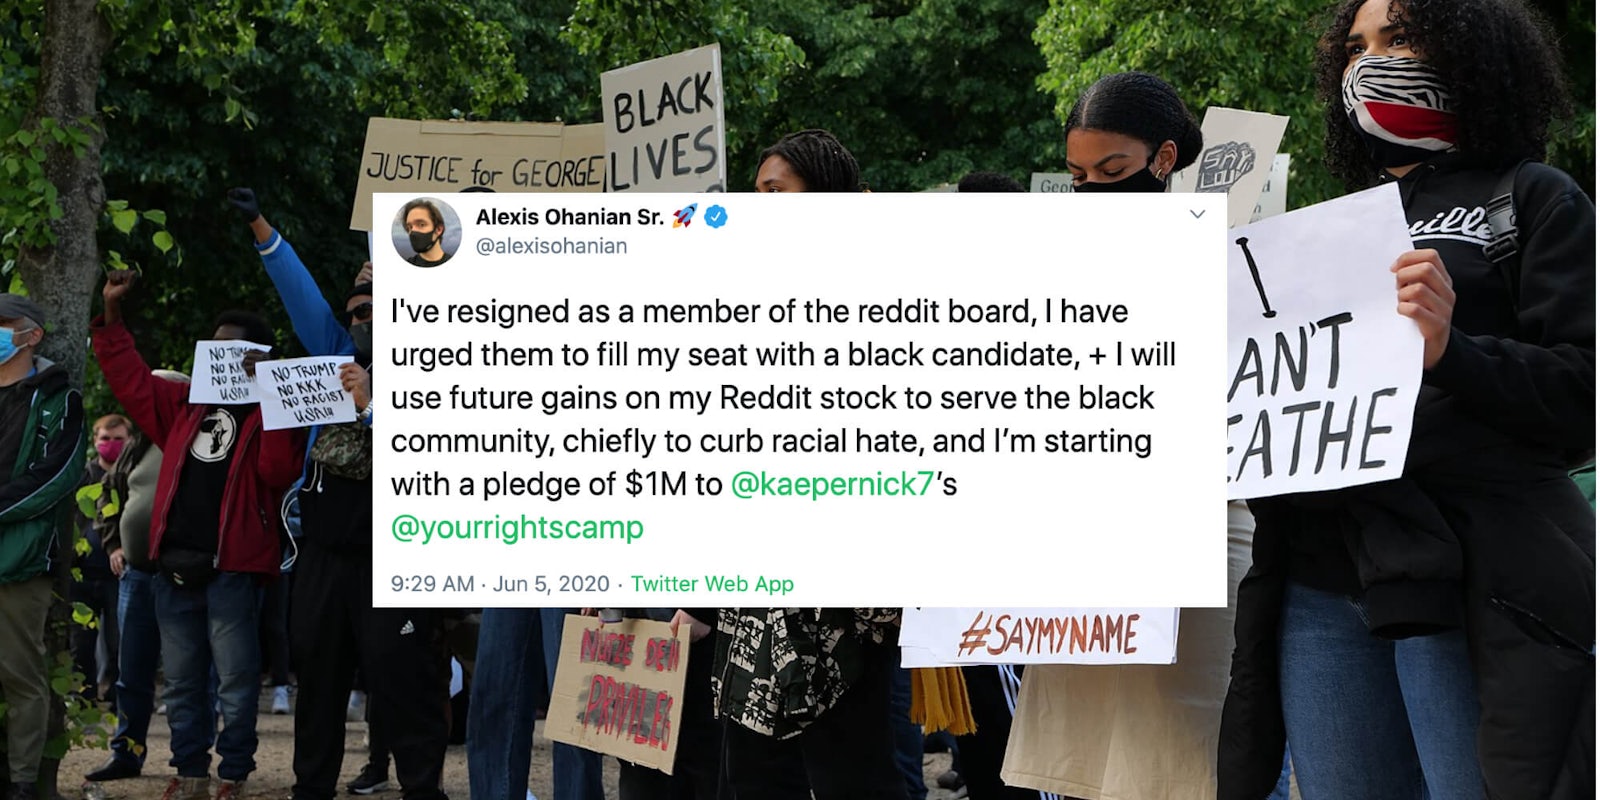 A tweet from a Reddit co-founder Alexis Ohanian over protesters